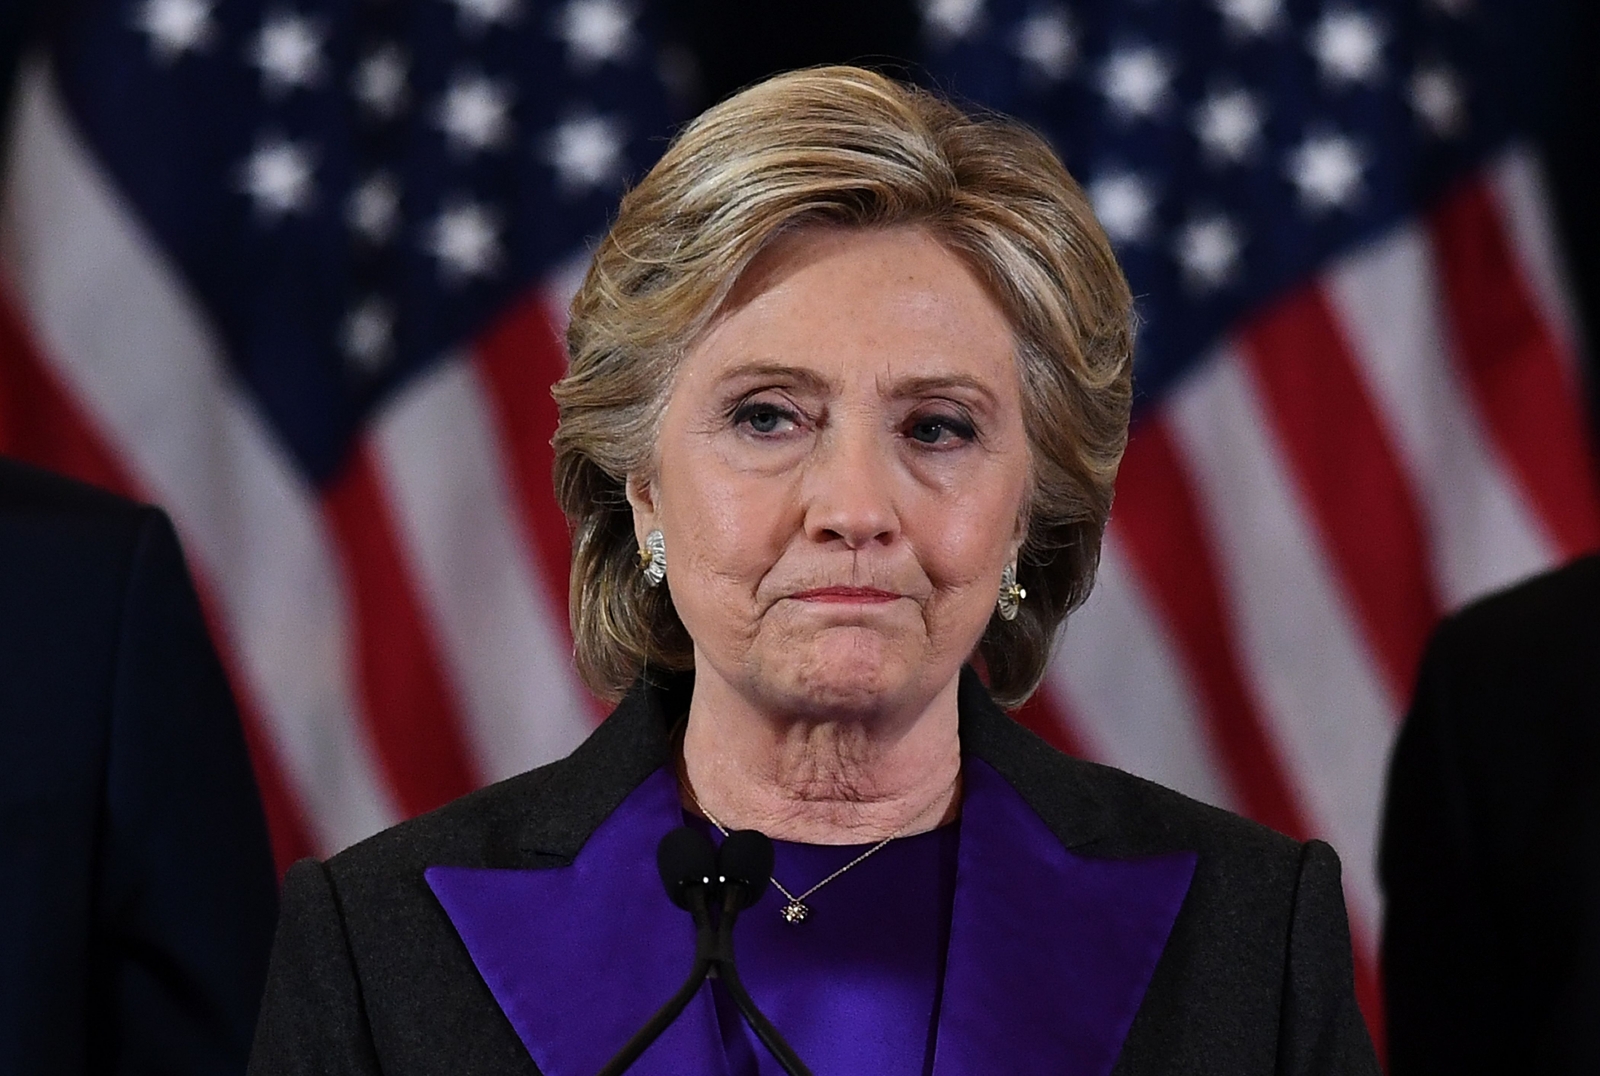 Hillary Clinton's concession speech: 'This is painful, and 